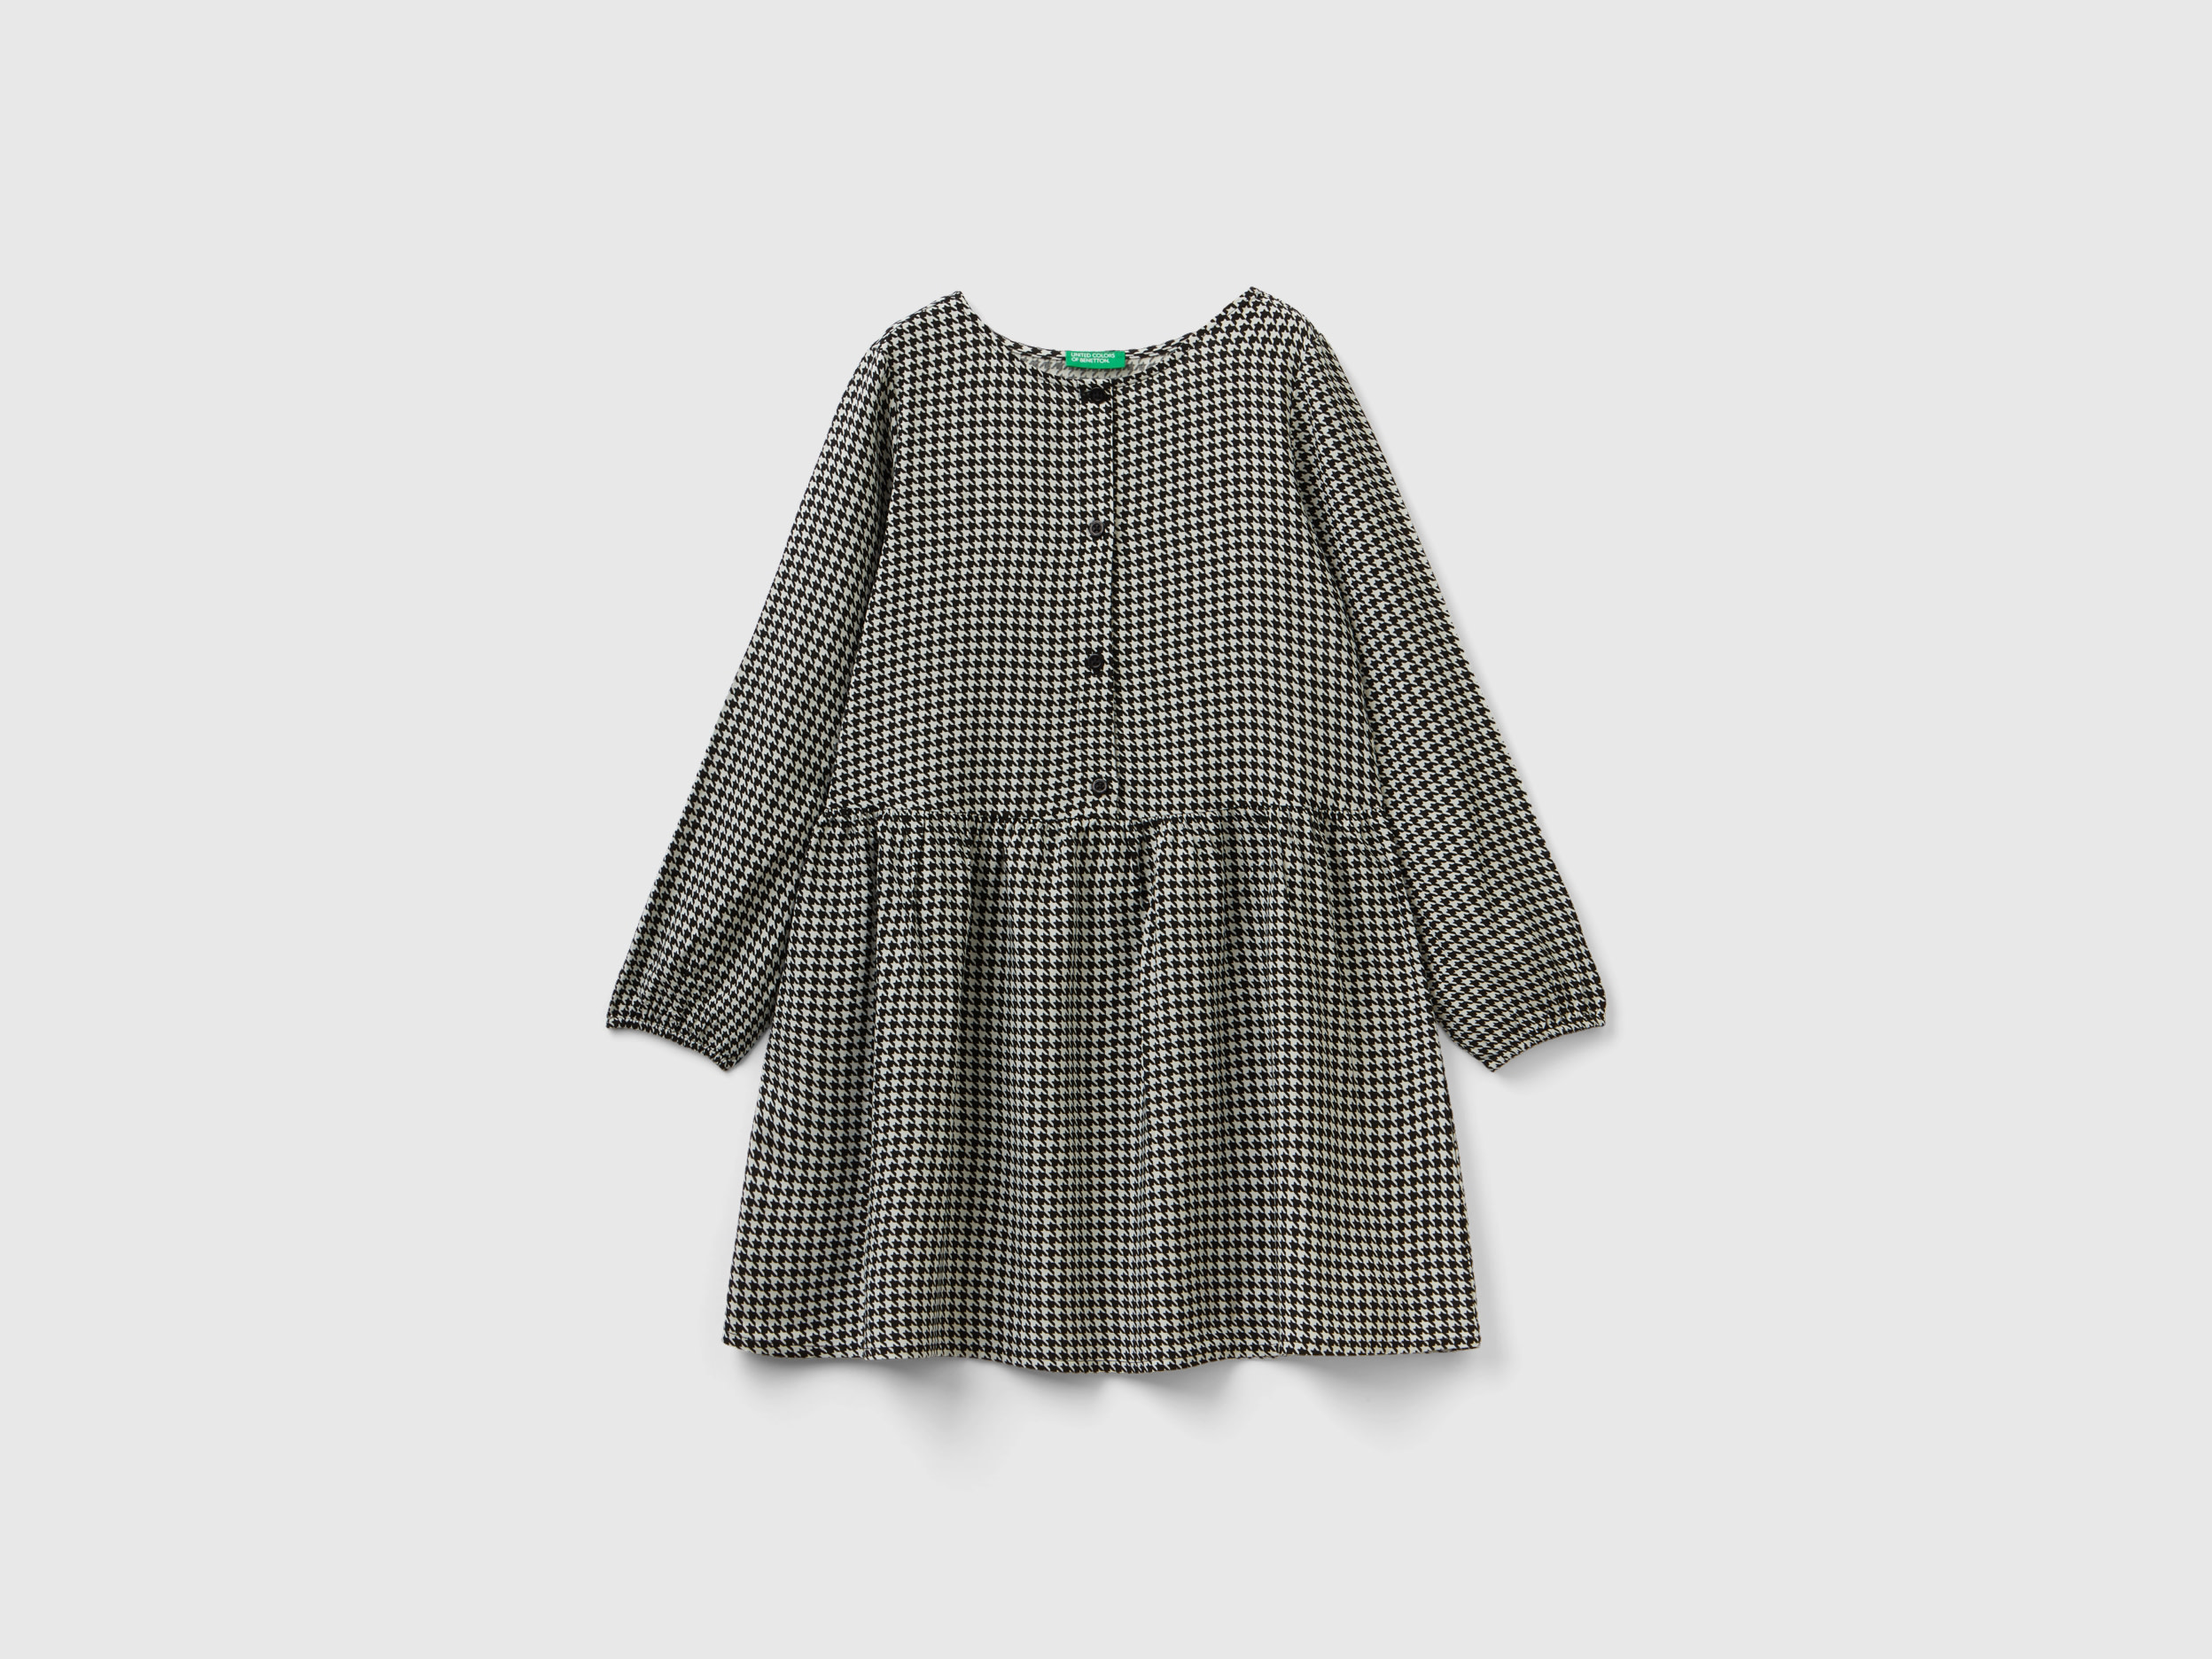 Benetton, Houndstooth Dress In Sustainable Viscose, size M, Black, Kids